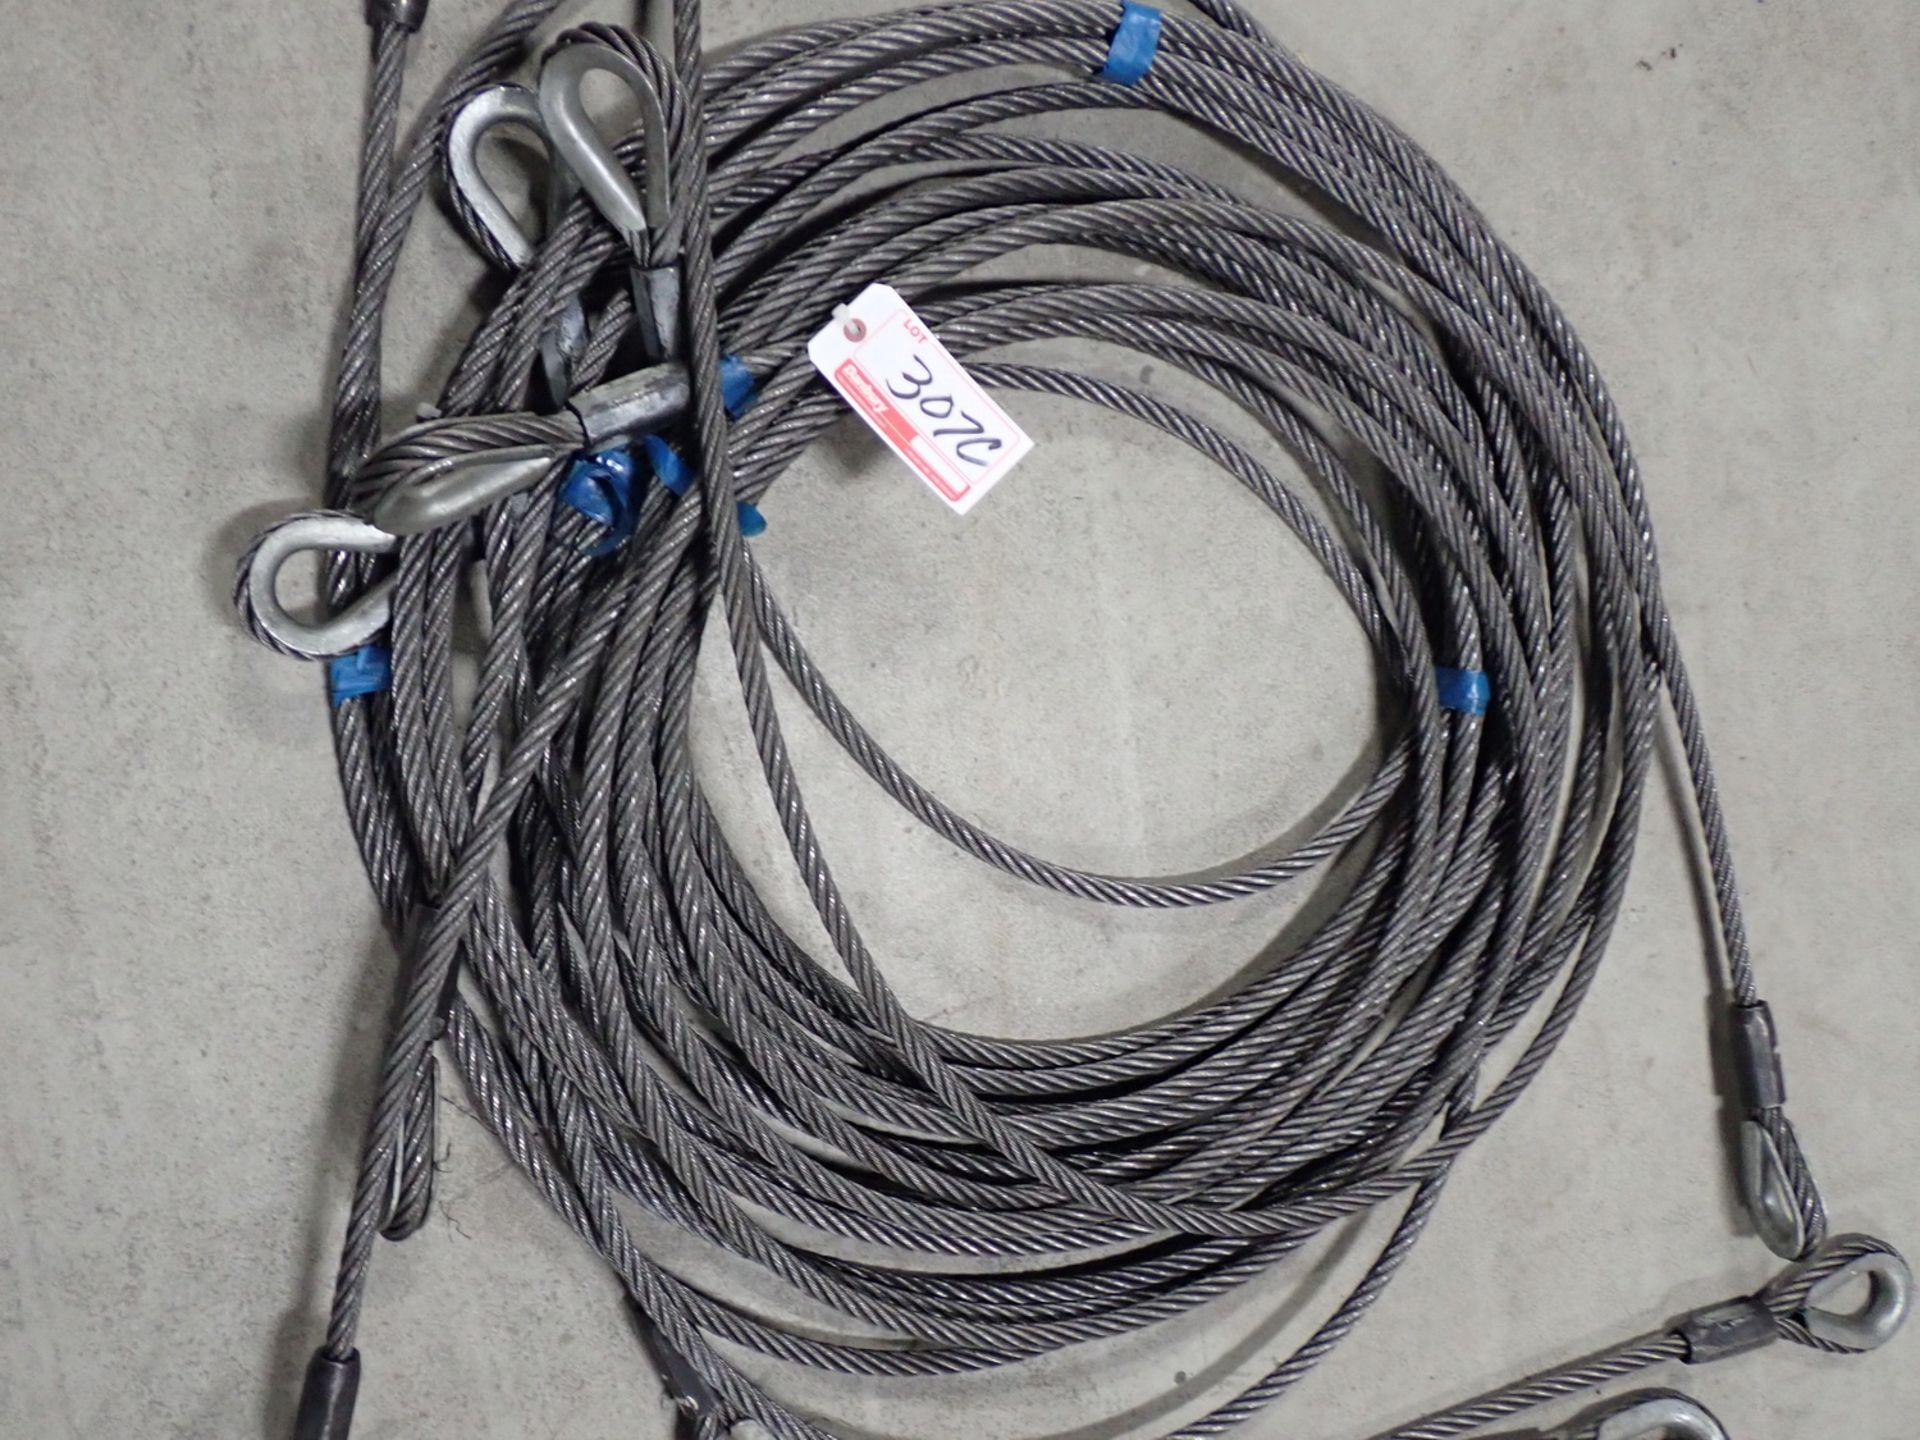 UNITS - GENERAL 3/4" X 30'L STEEL CABLE SLINGS (BLUE TAPE)